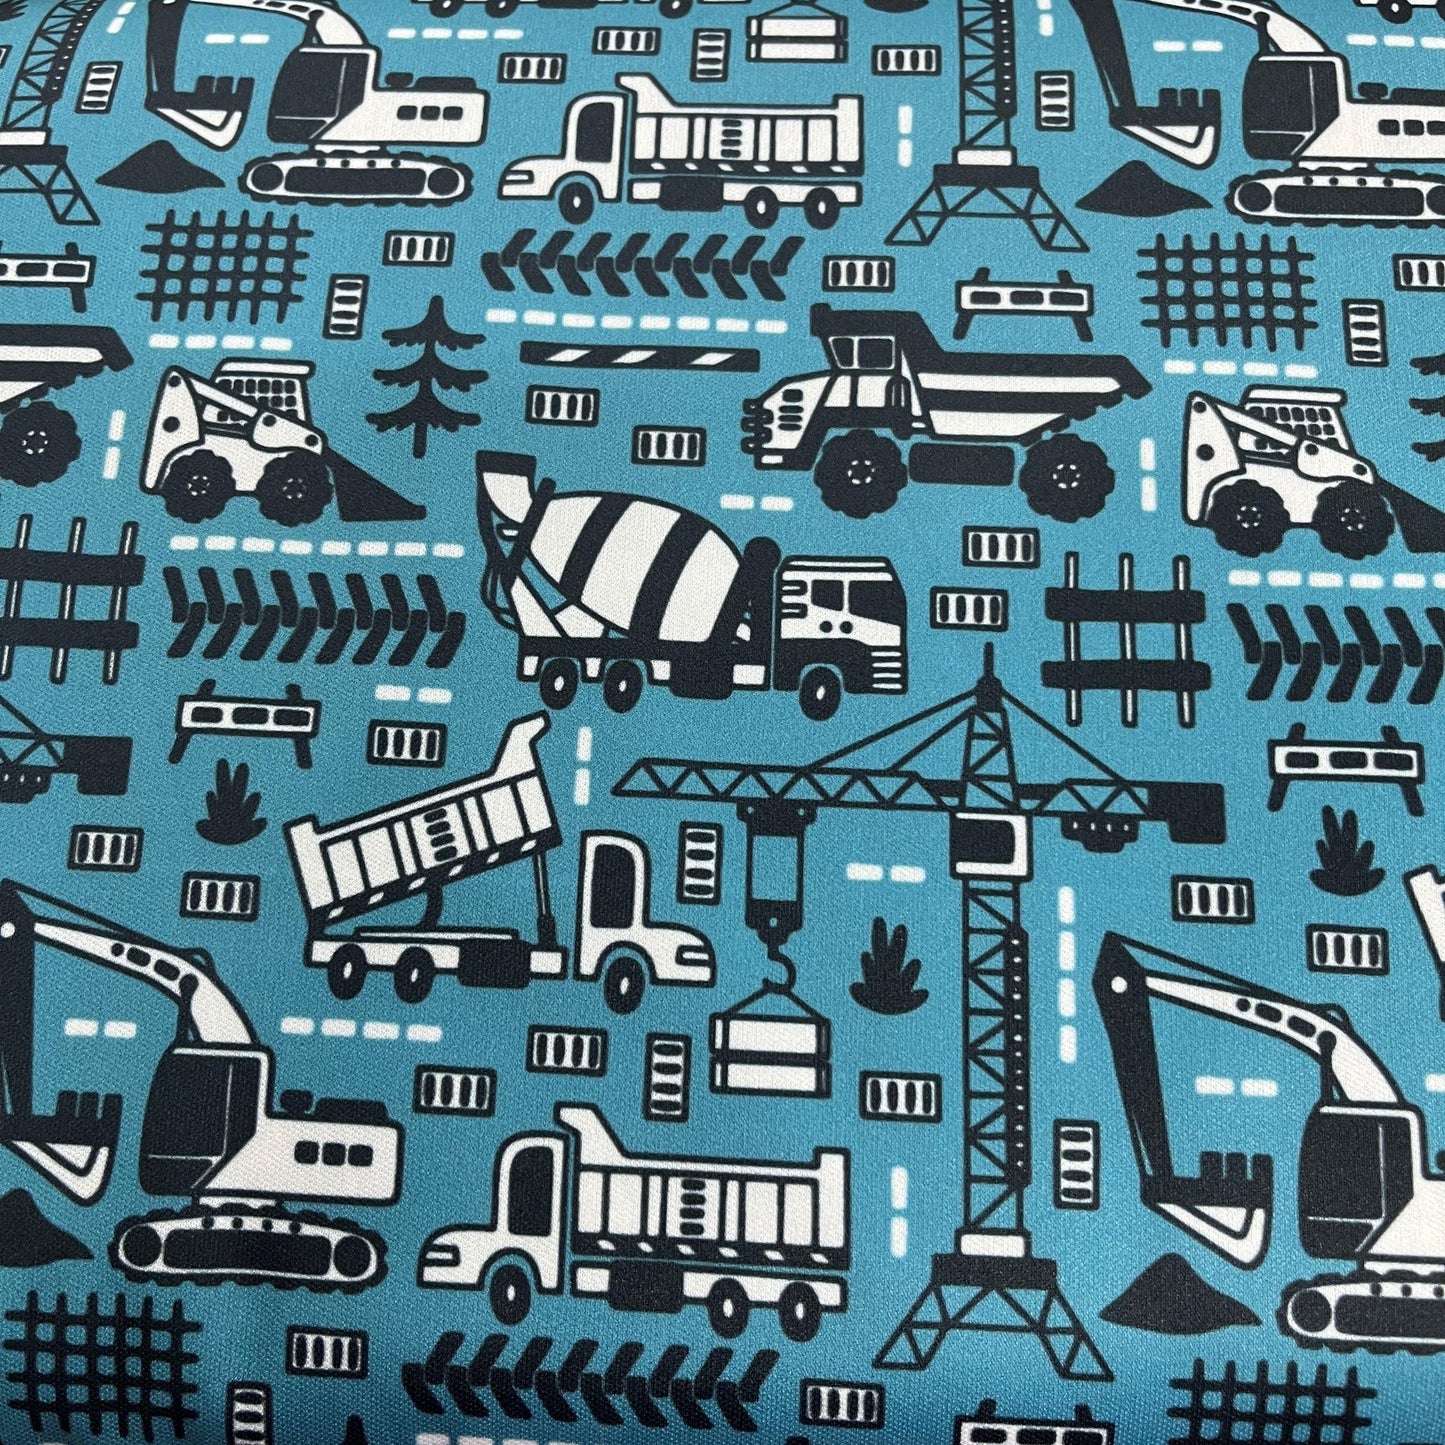 Construction on Teal 1 mil PUL Fabric - Made in the USA - Nature's Fabrics